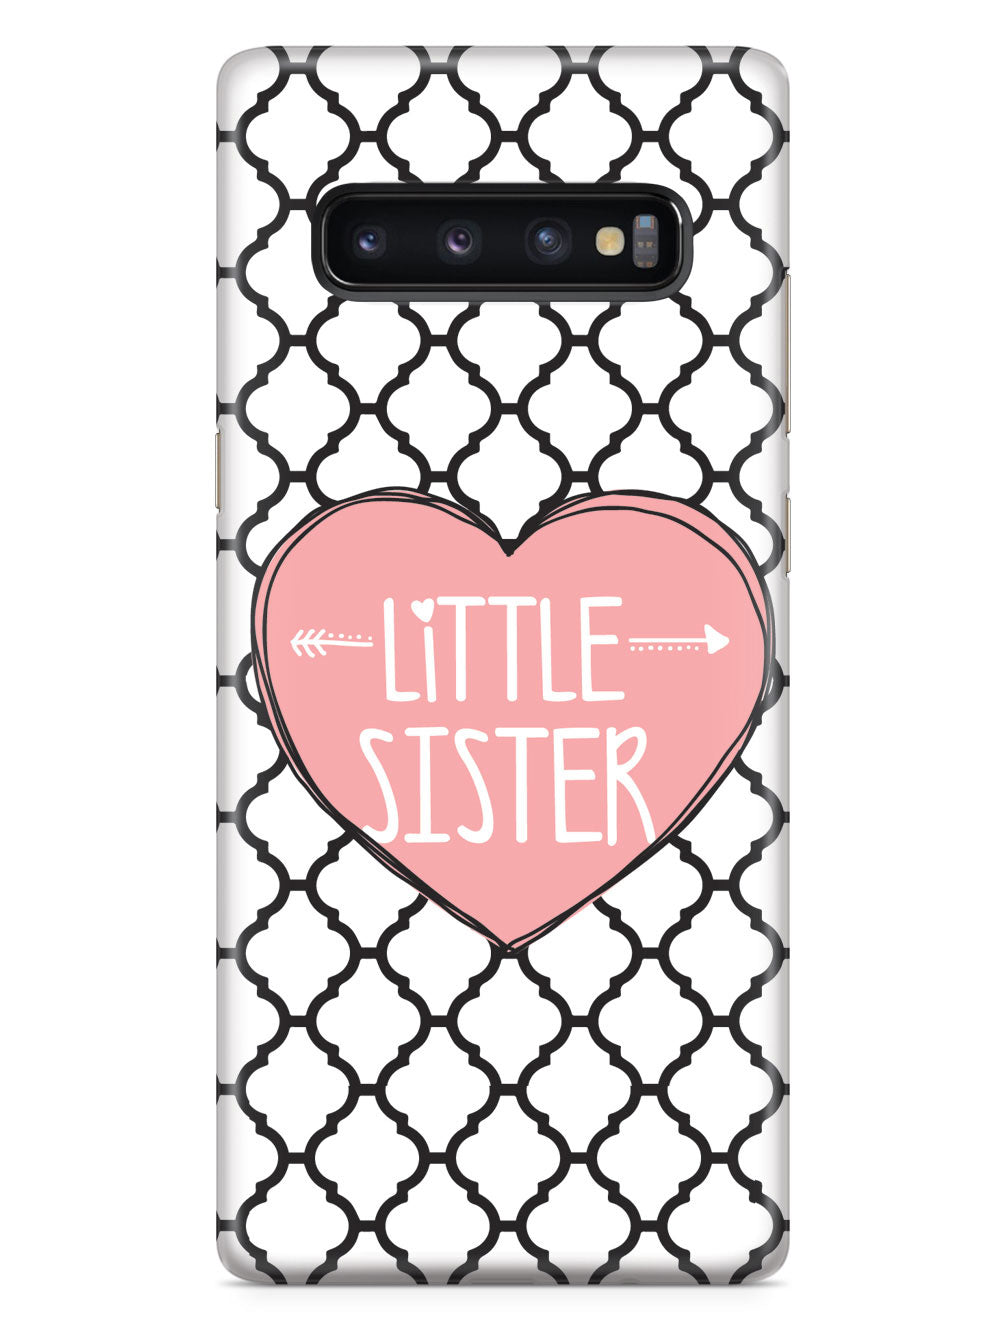 Sisterly Love - Little Sister - Moroccan Case